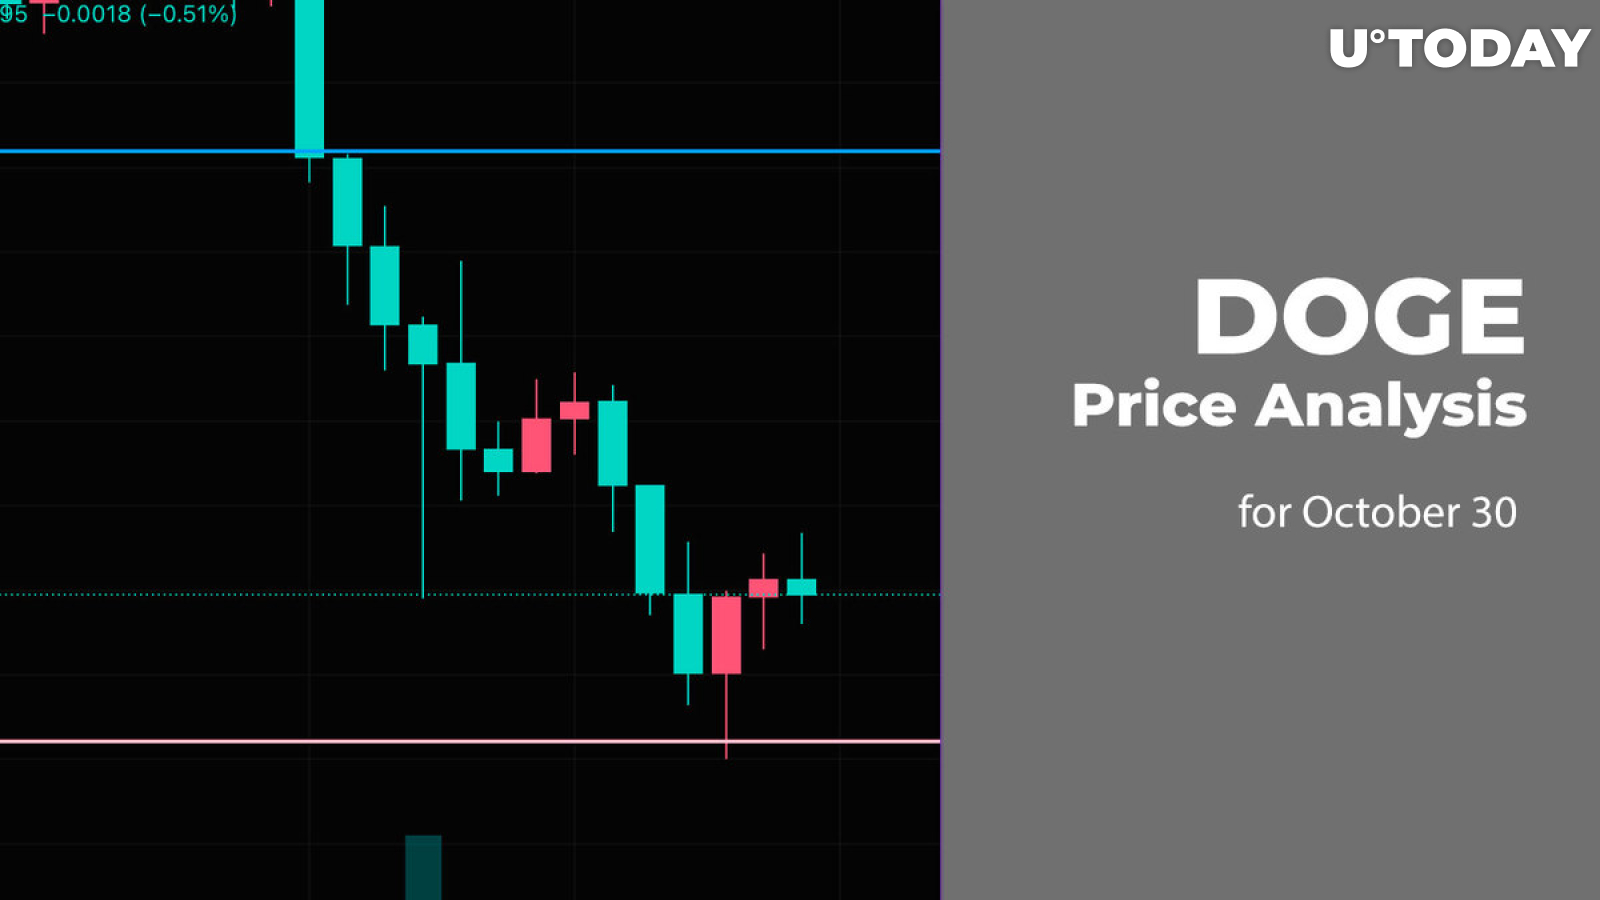 DOGE Price Analysis for October 30